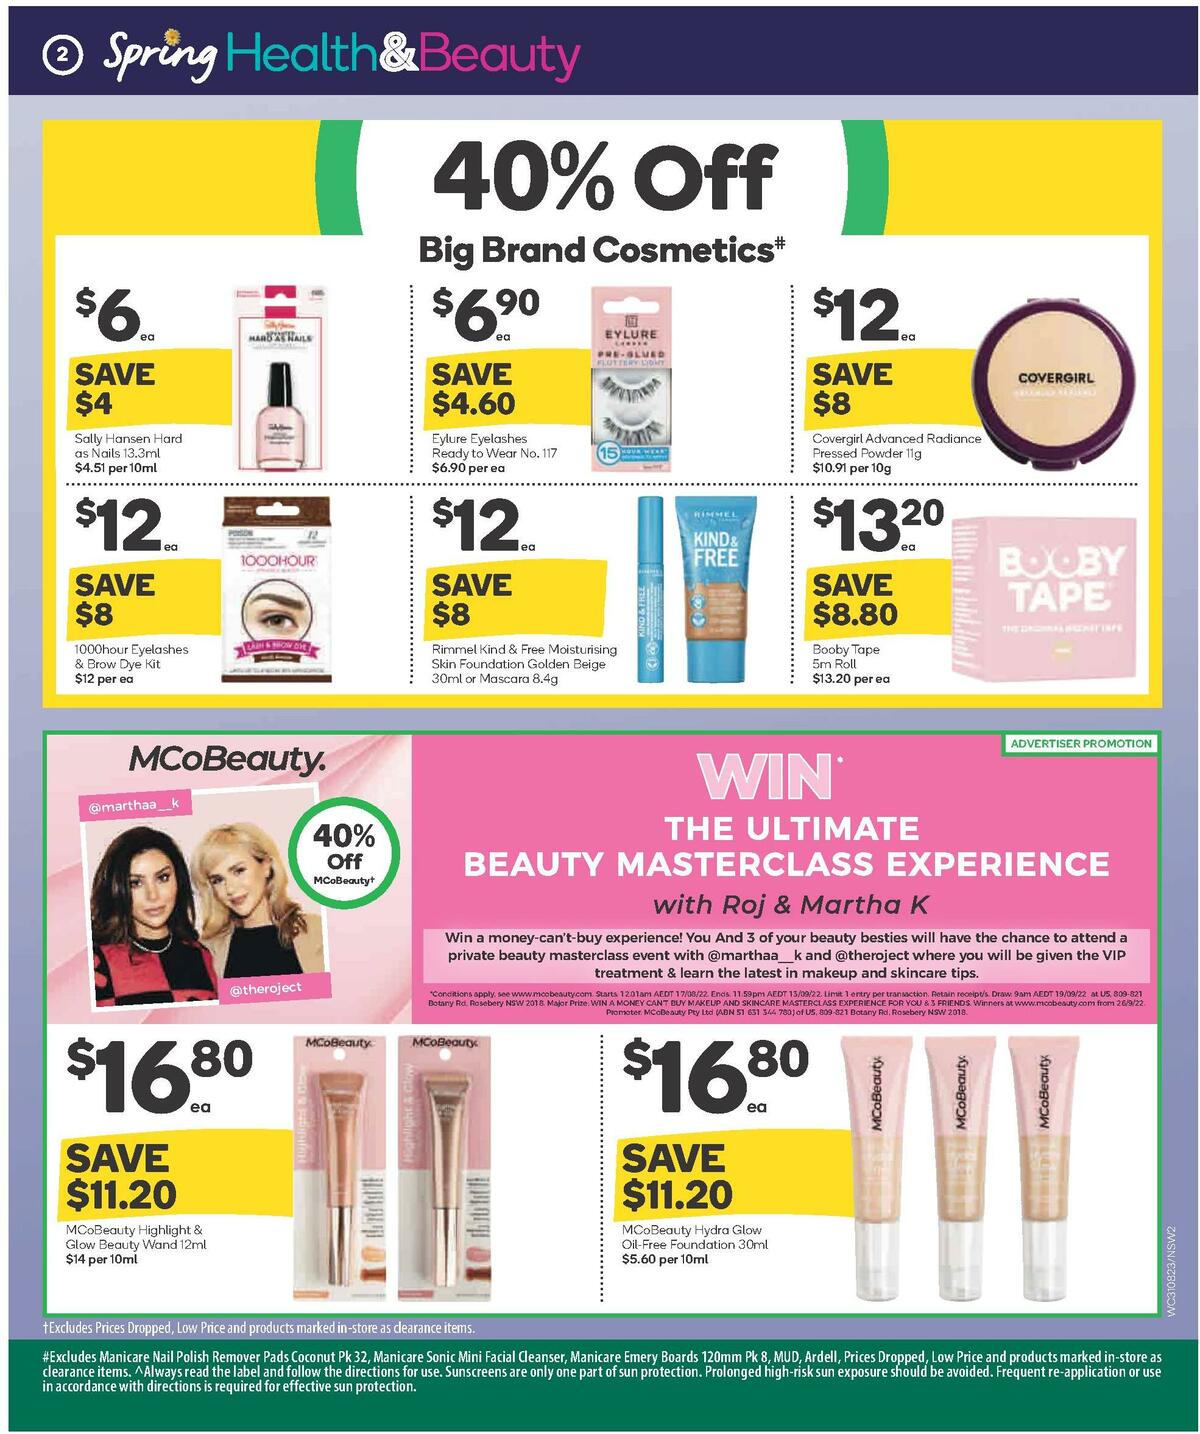 Woolworths Health & Beauty Catalogues from 31 August